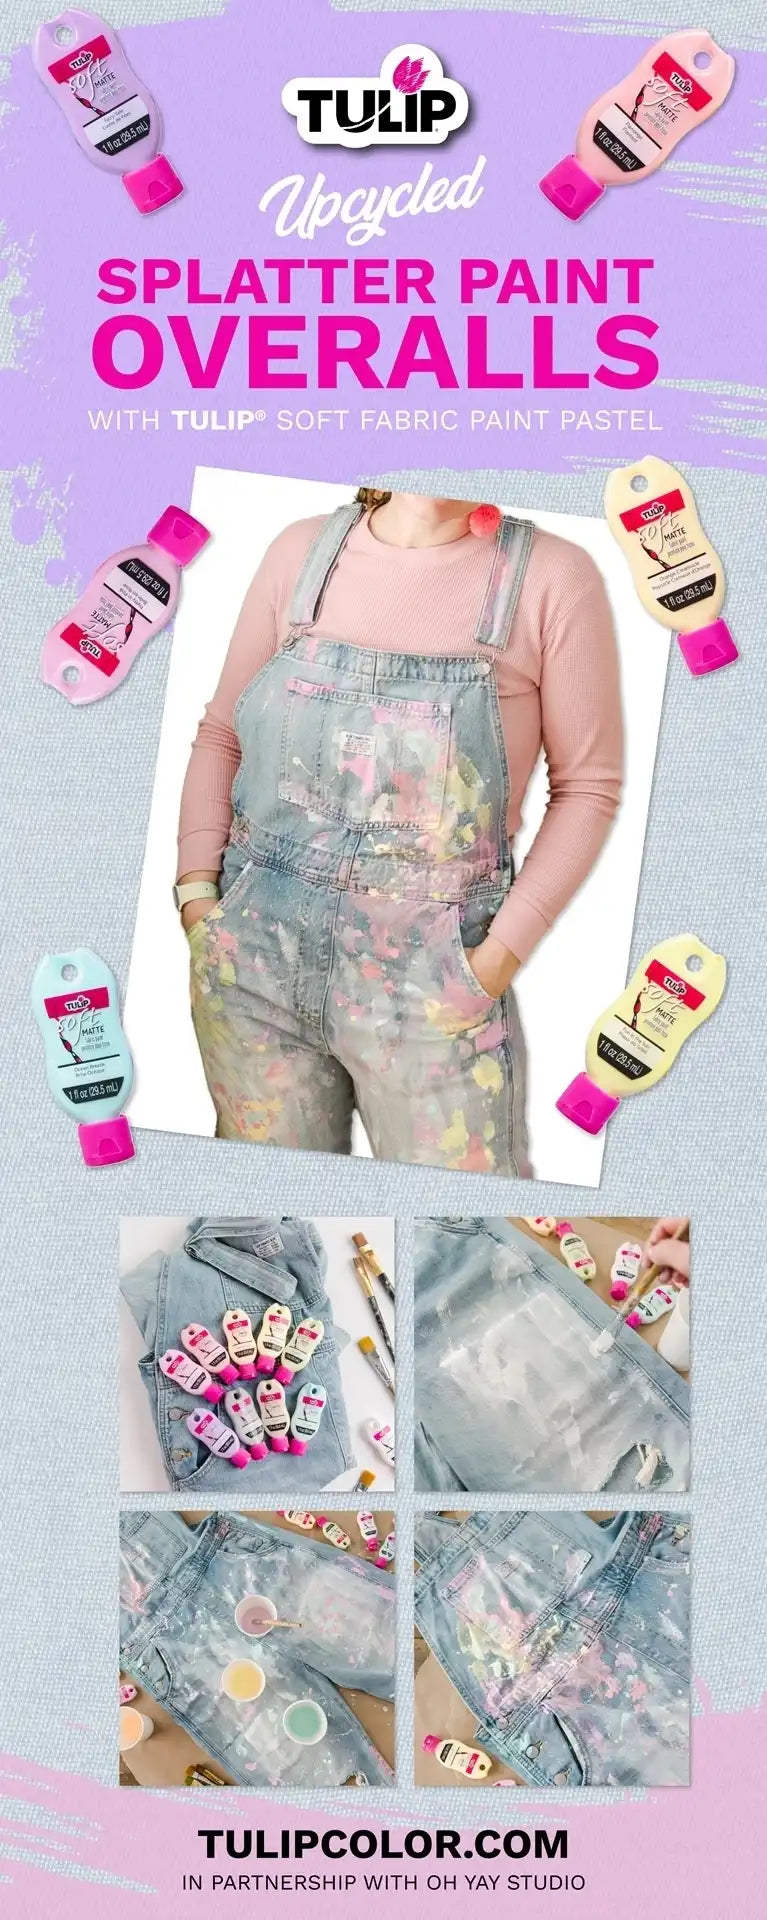 Upcycled Splatter Paint Overalls